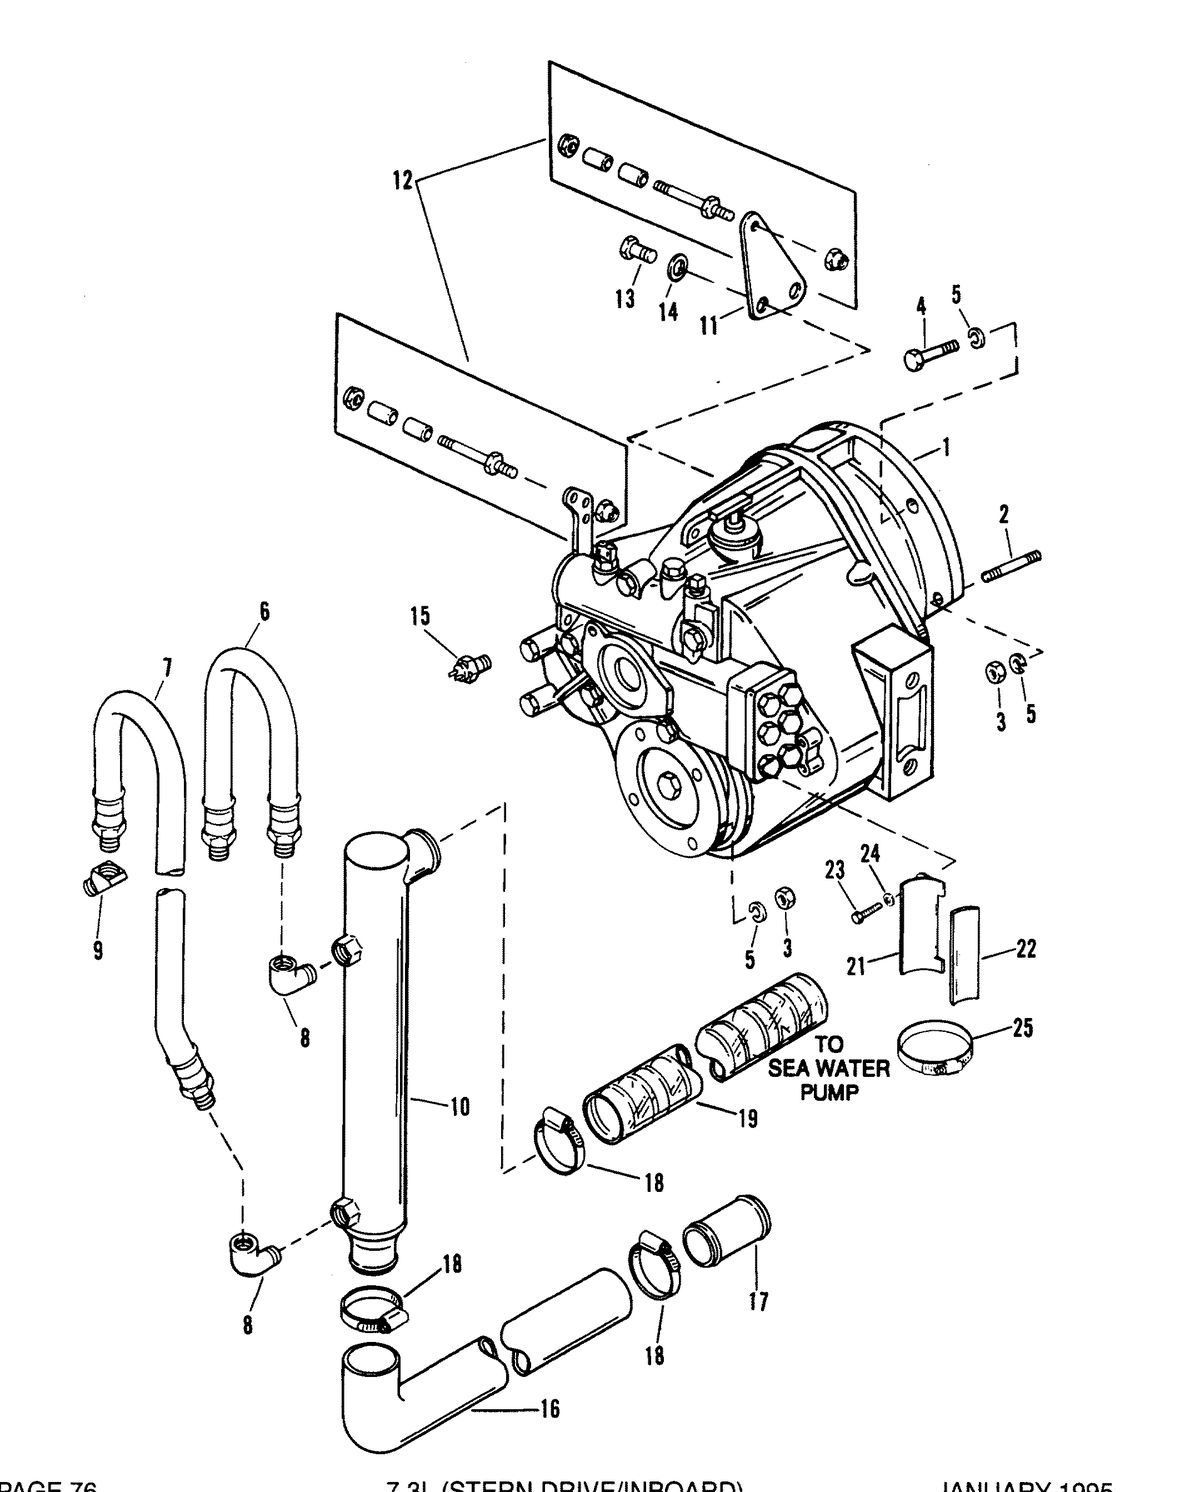 MERCRUISER D7.3L/270 DIESEL ENGINE (STERN DRIVE/INBOARD) TRANSMISSION AND RELATED PARTS (INBOARD)